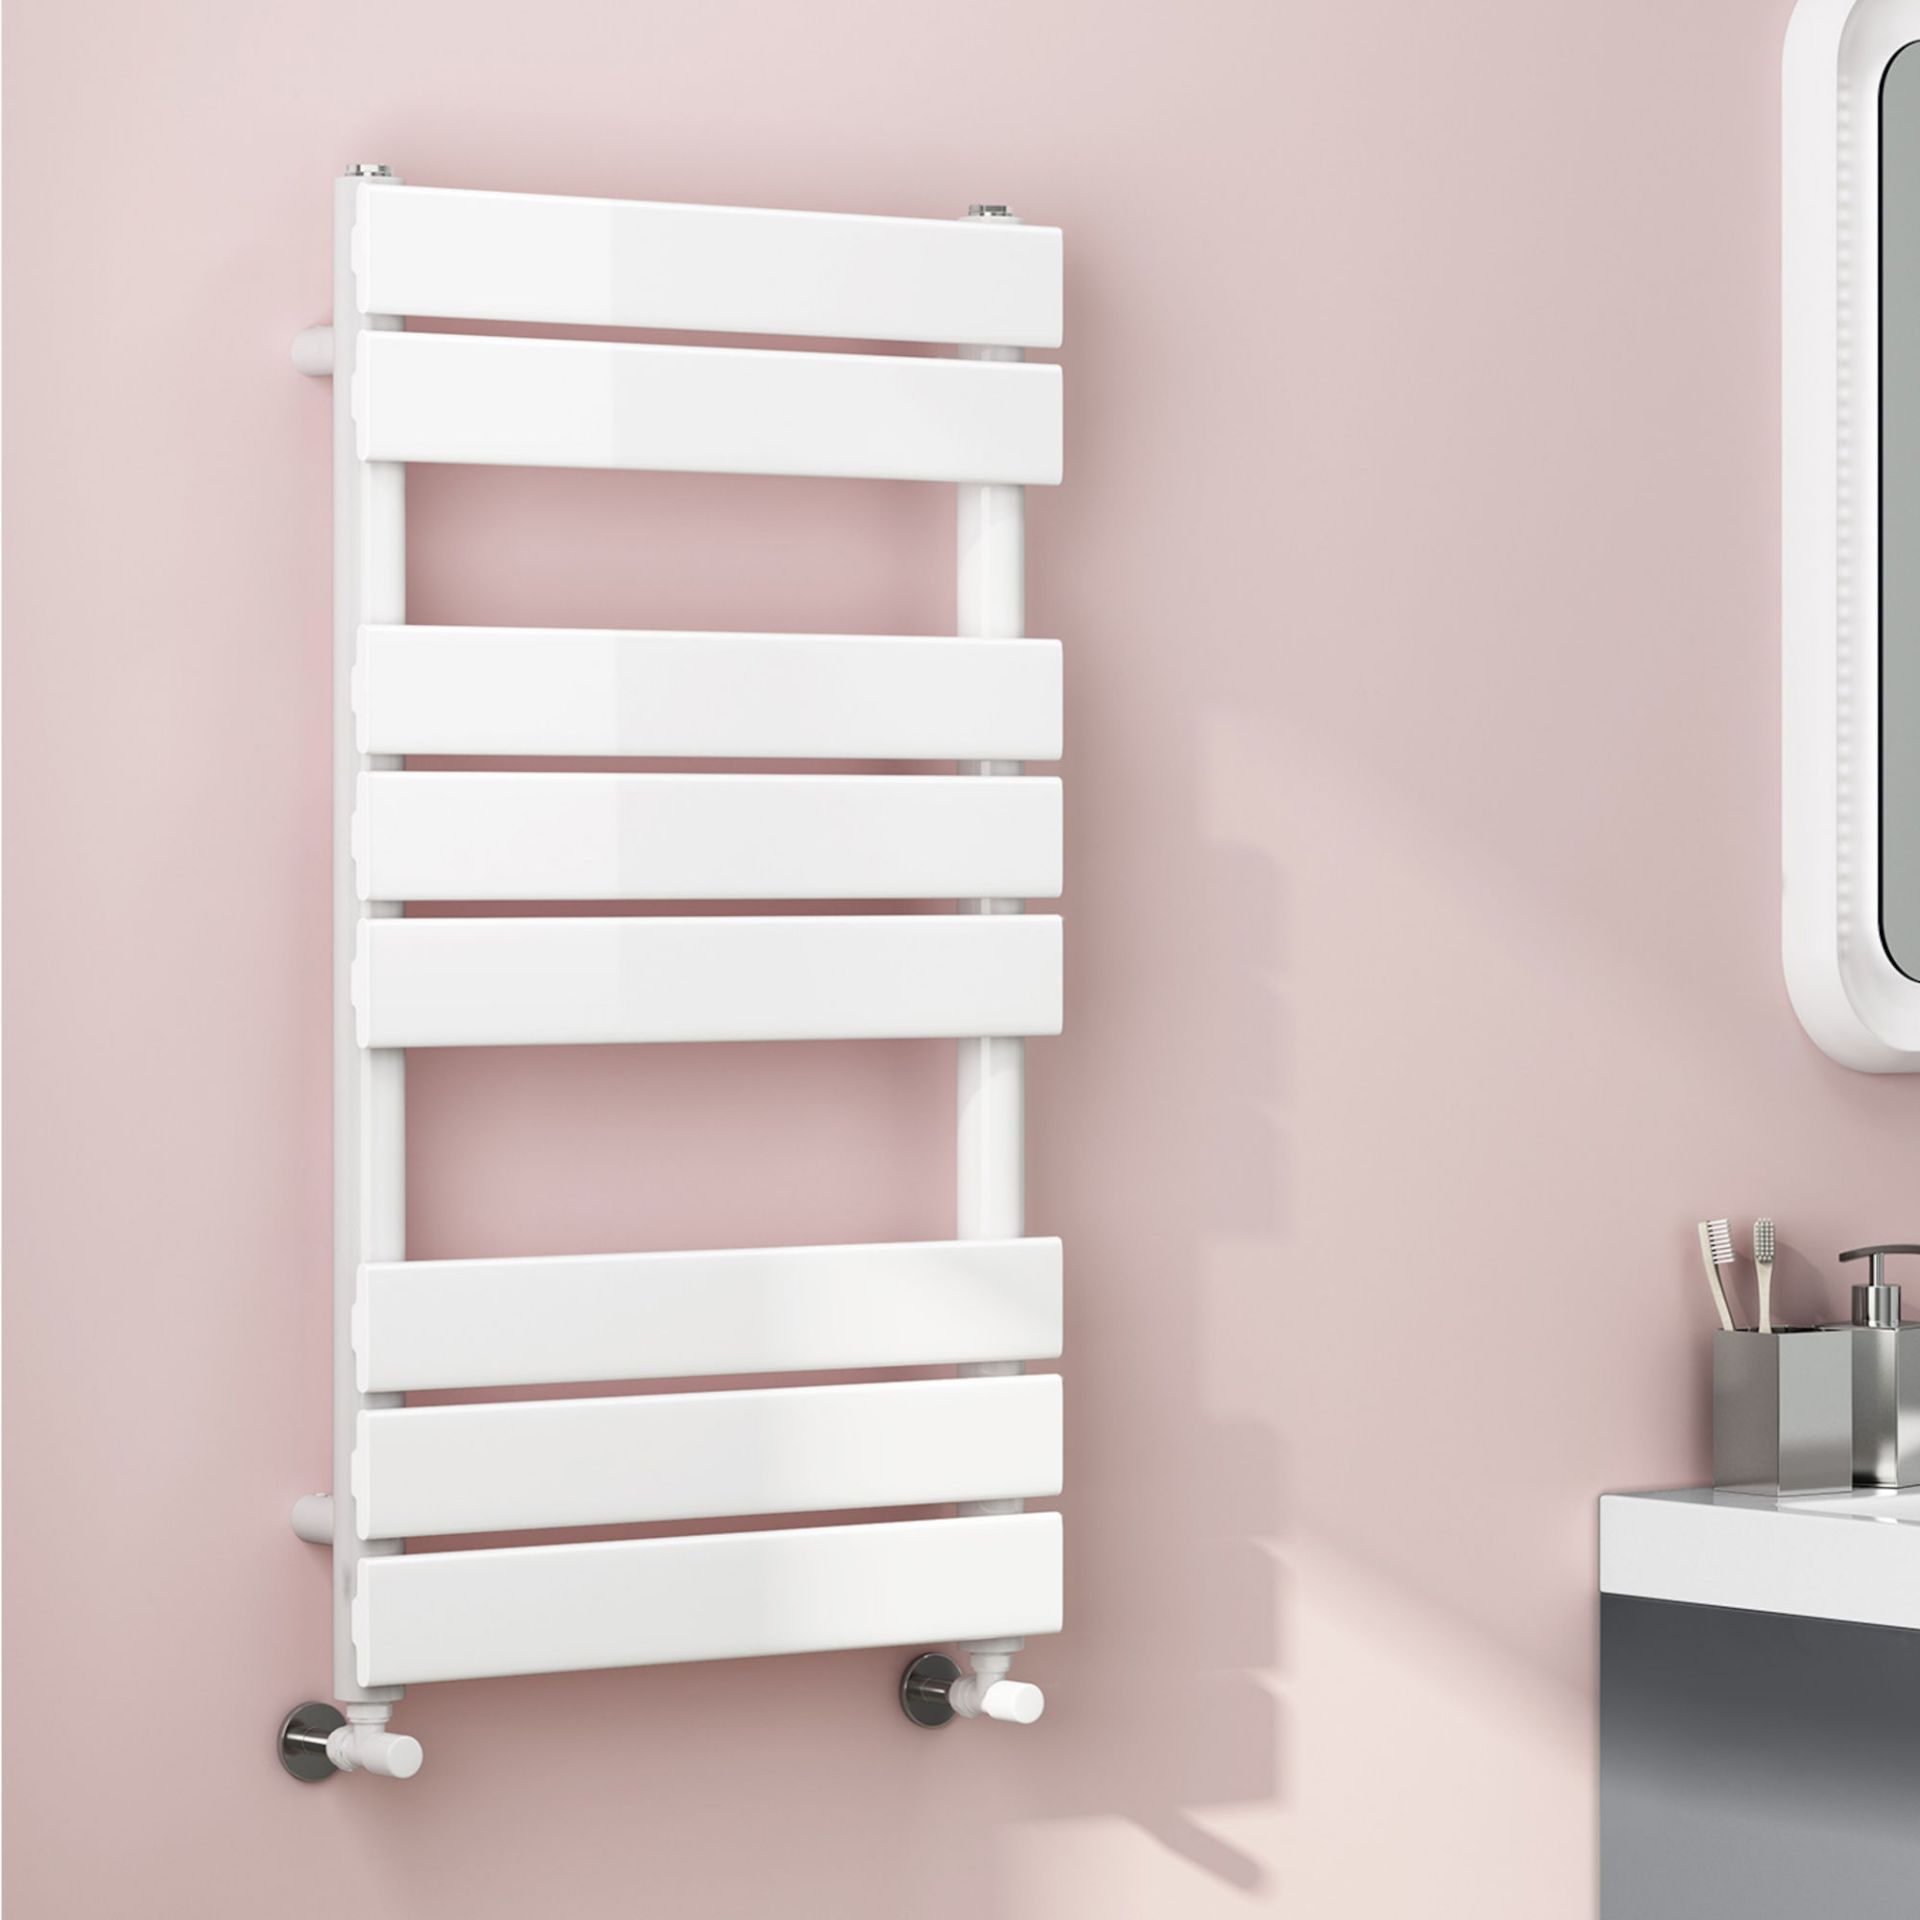 (ZL49) 800x450mm White Flat Panel Ladder Towel Radiator. Made from low carbon steel with a high